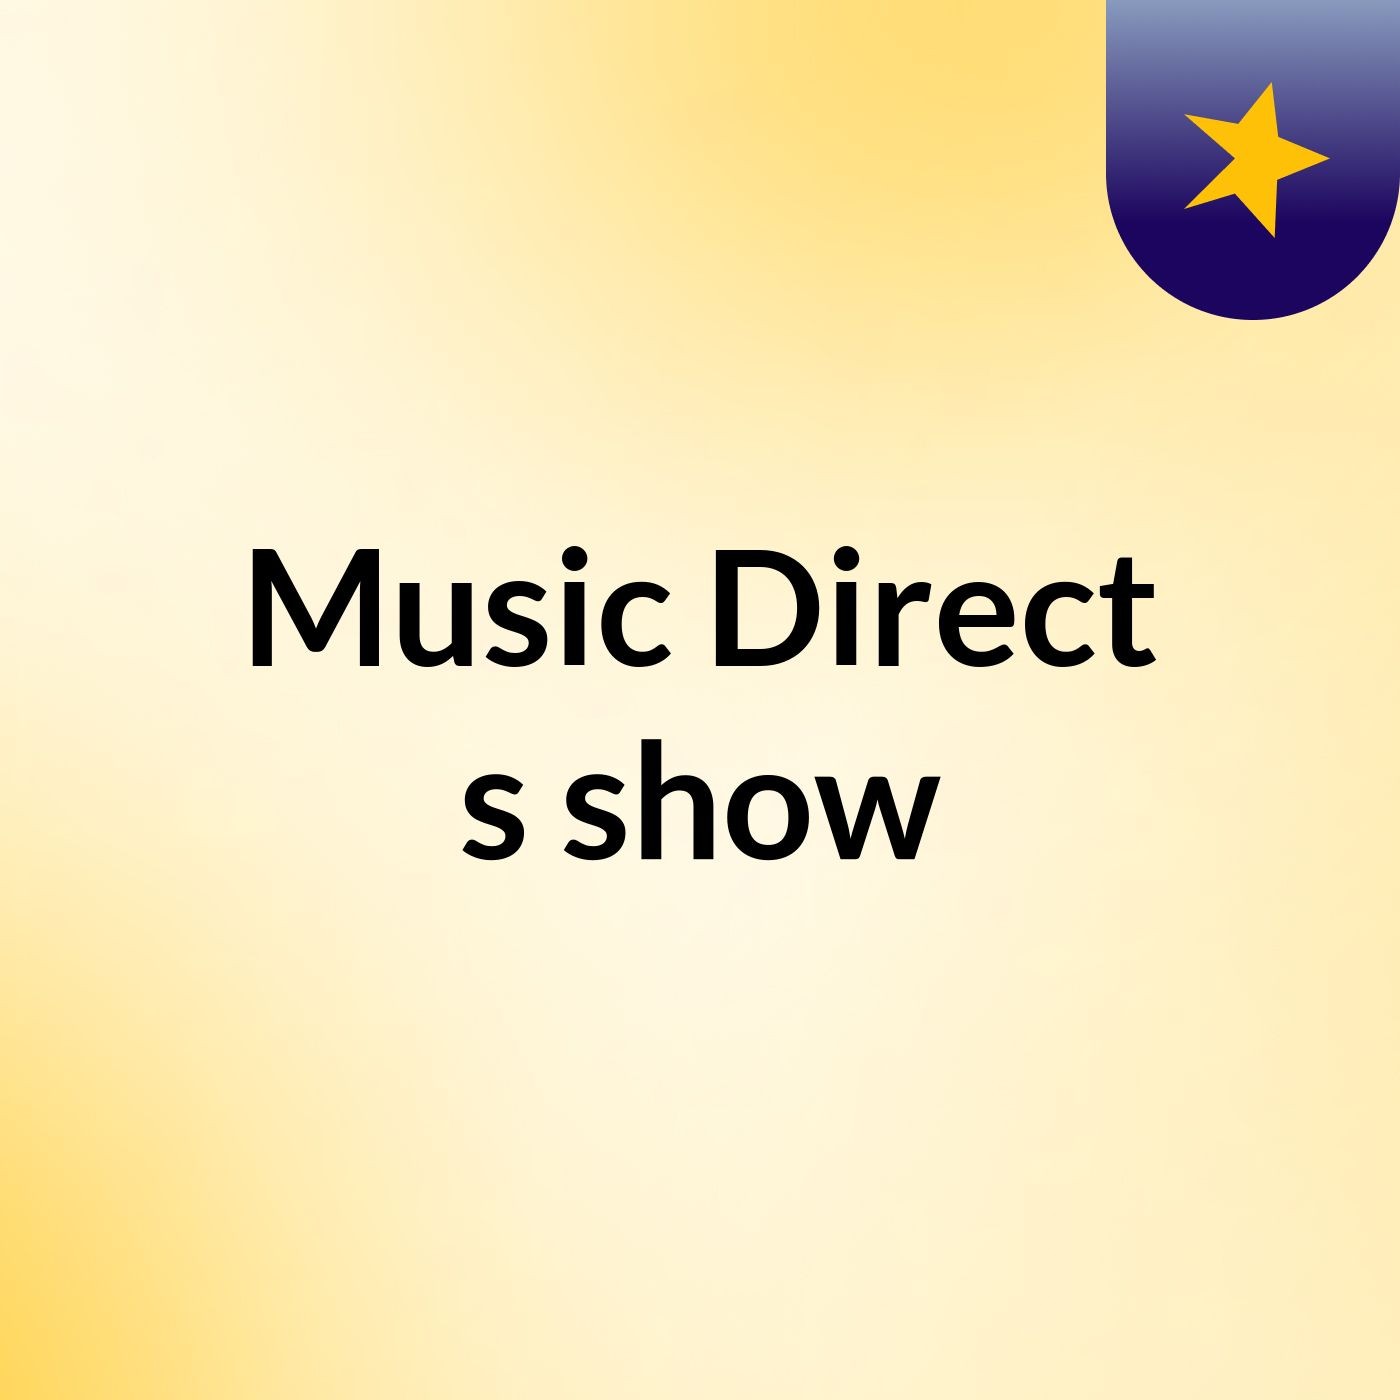 Music Direct's show